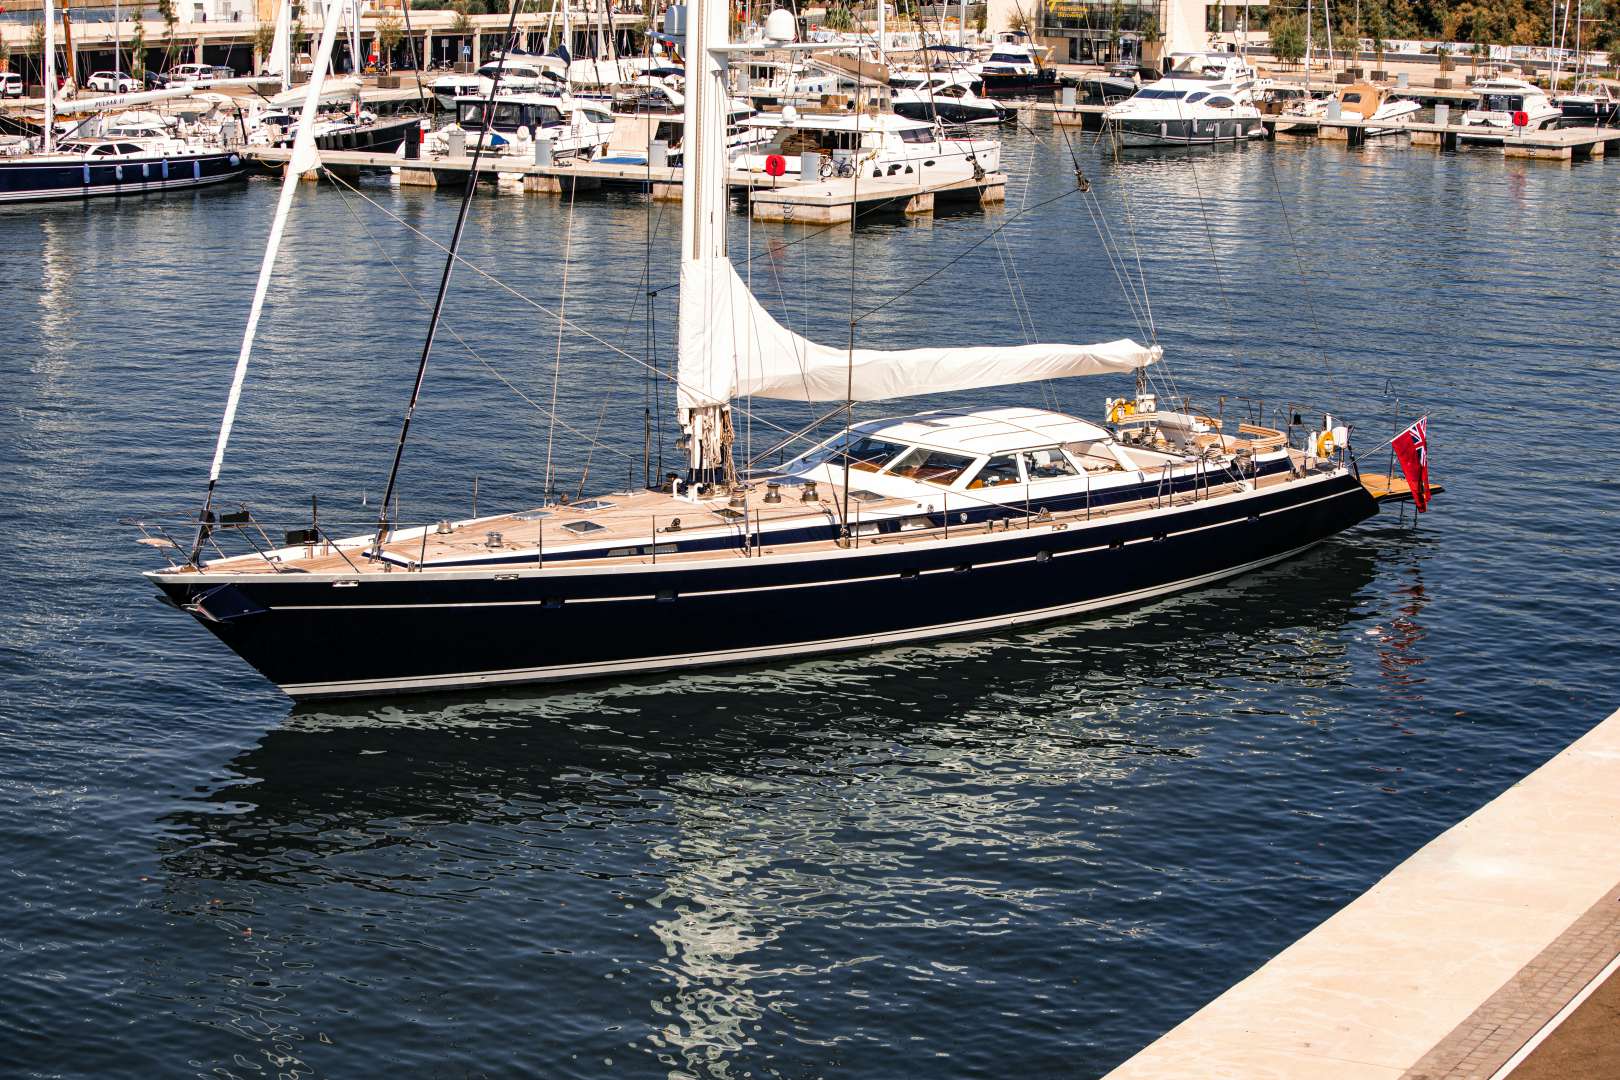 Scarena
Yacht for Sale